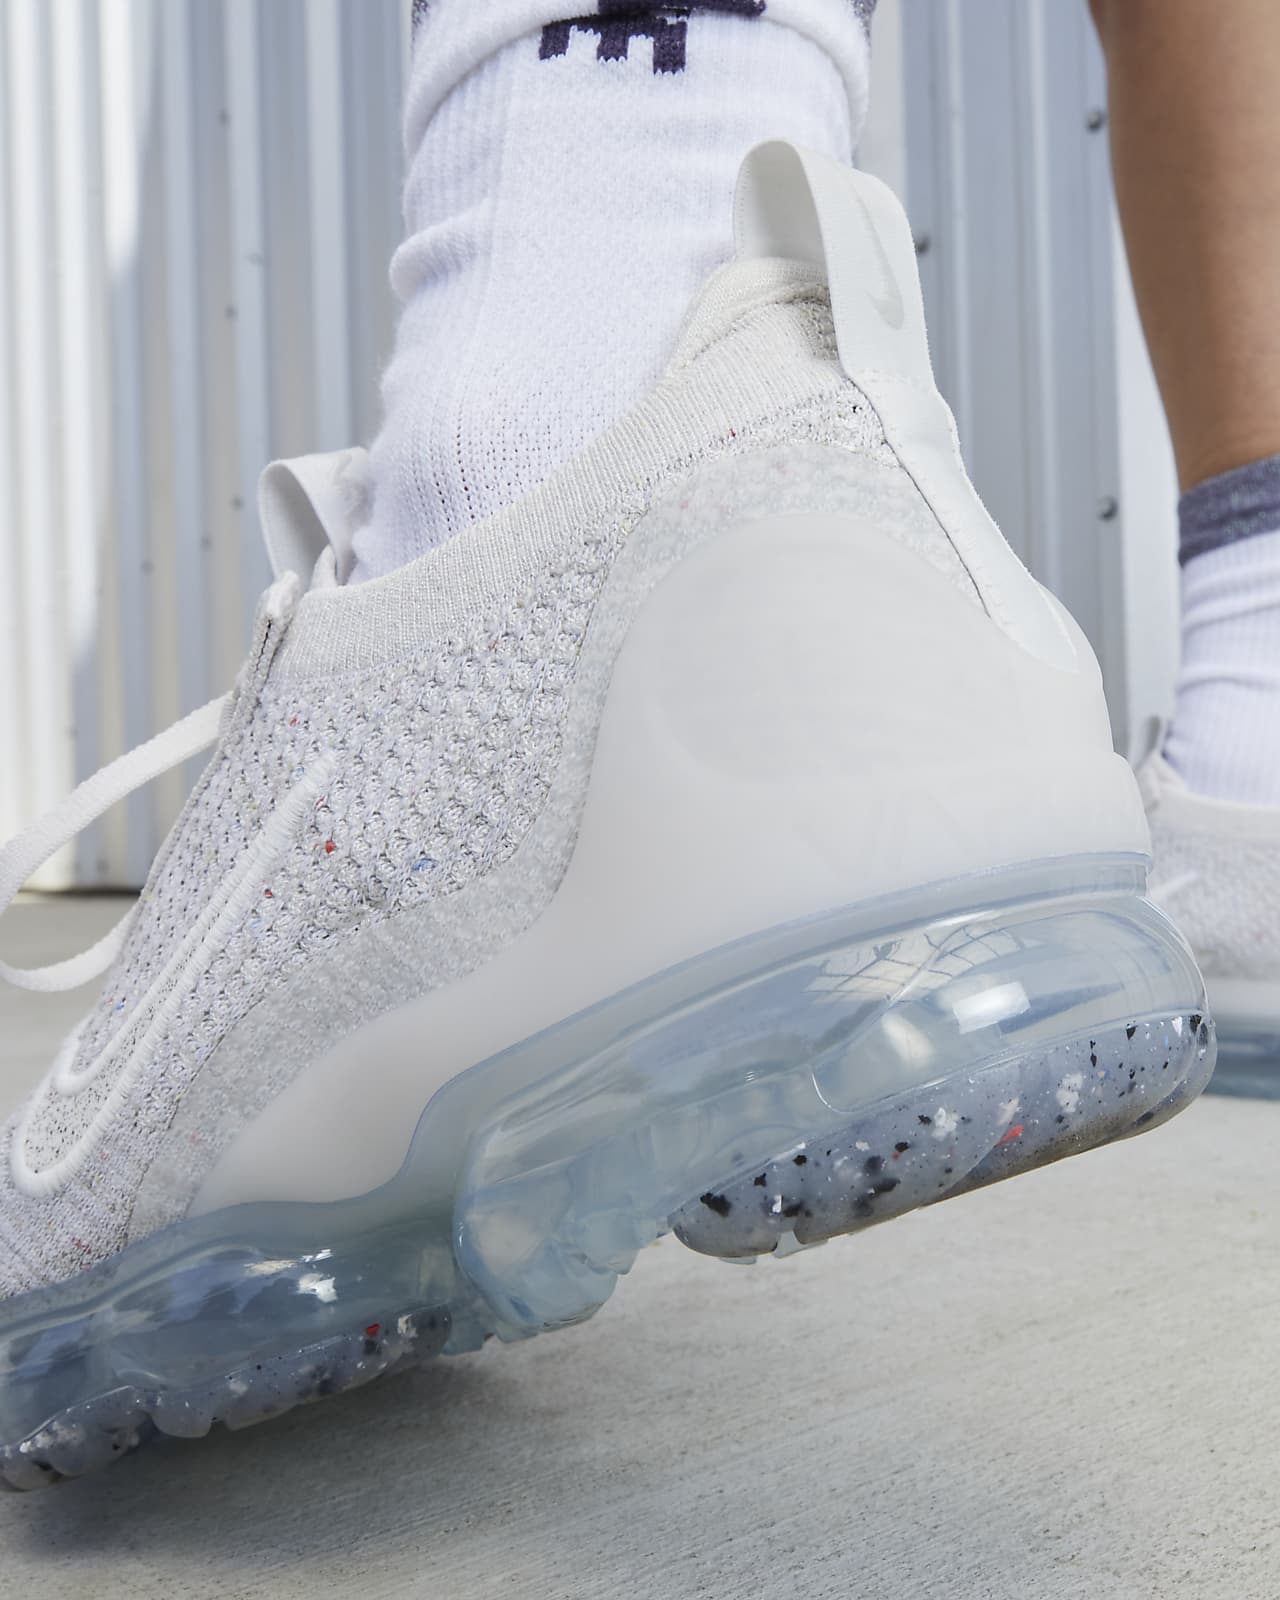 women's nike air vapormax loafers